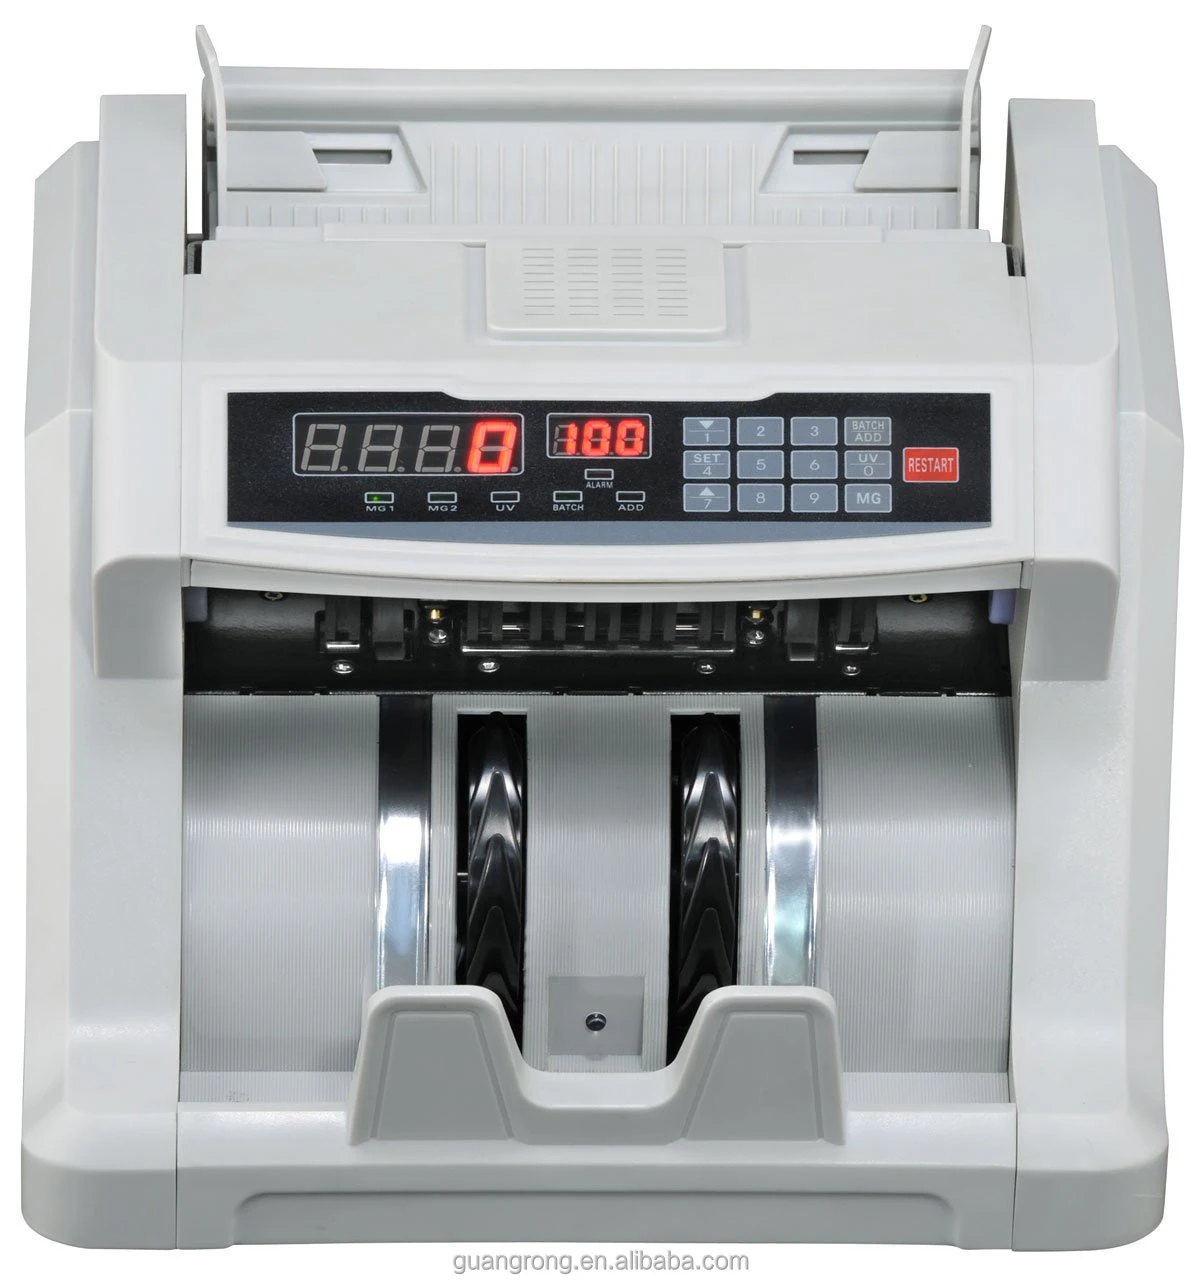 GR6600 UV+MG+IR+SIZE detection Bill Cash Counting Machine Banknote Counter